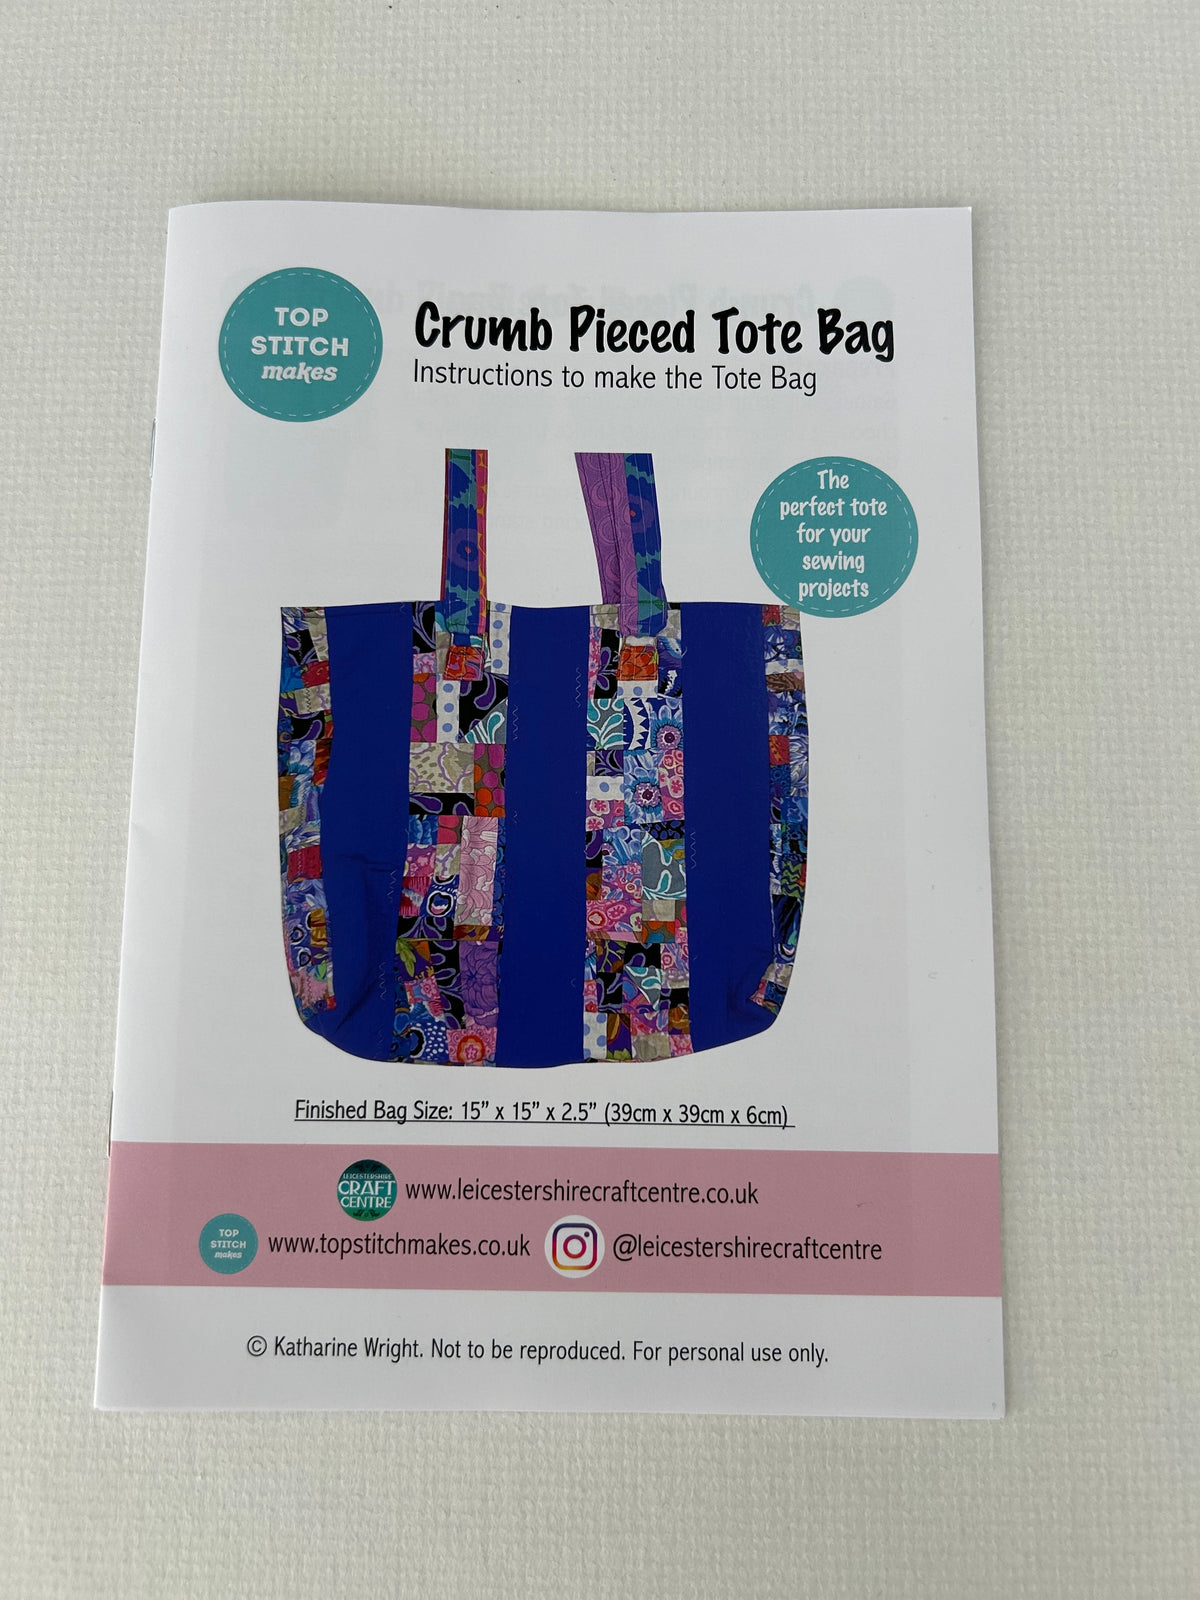 Crumb Pieced Tote Bag Pattern by Top Stitch Makes